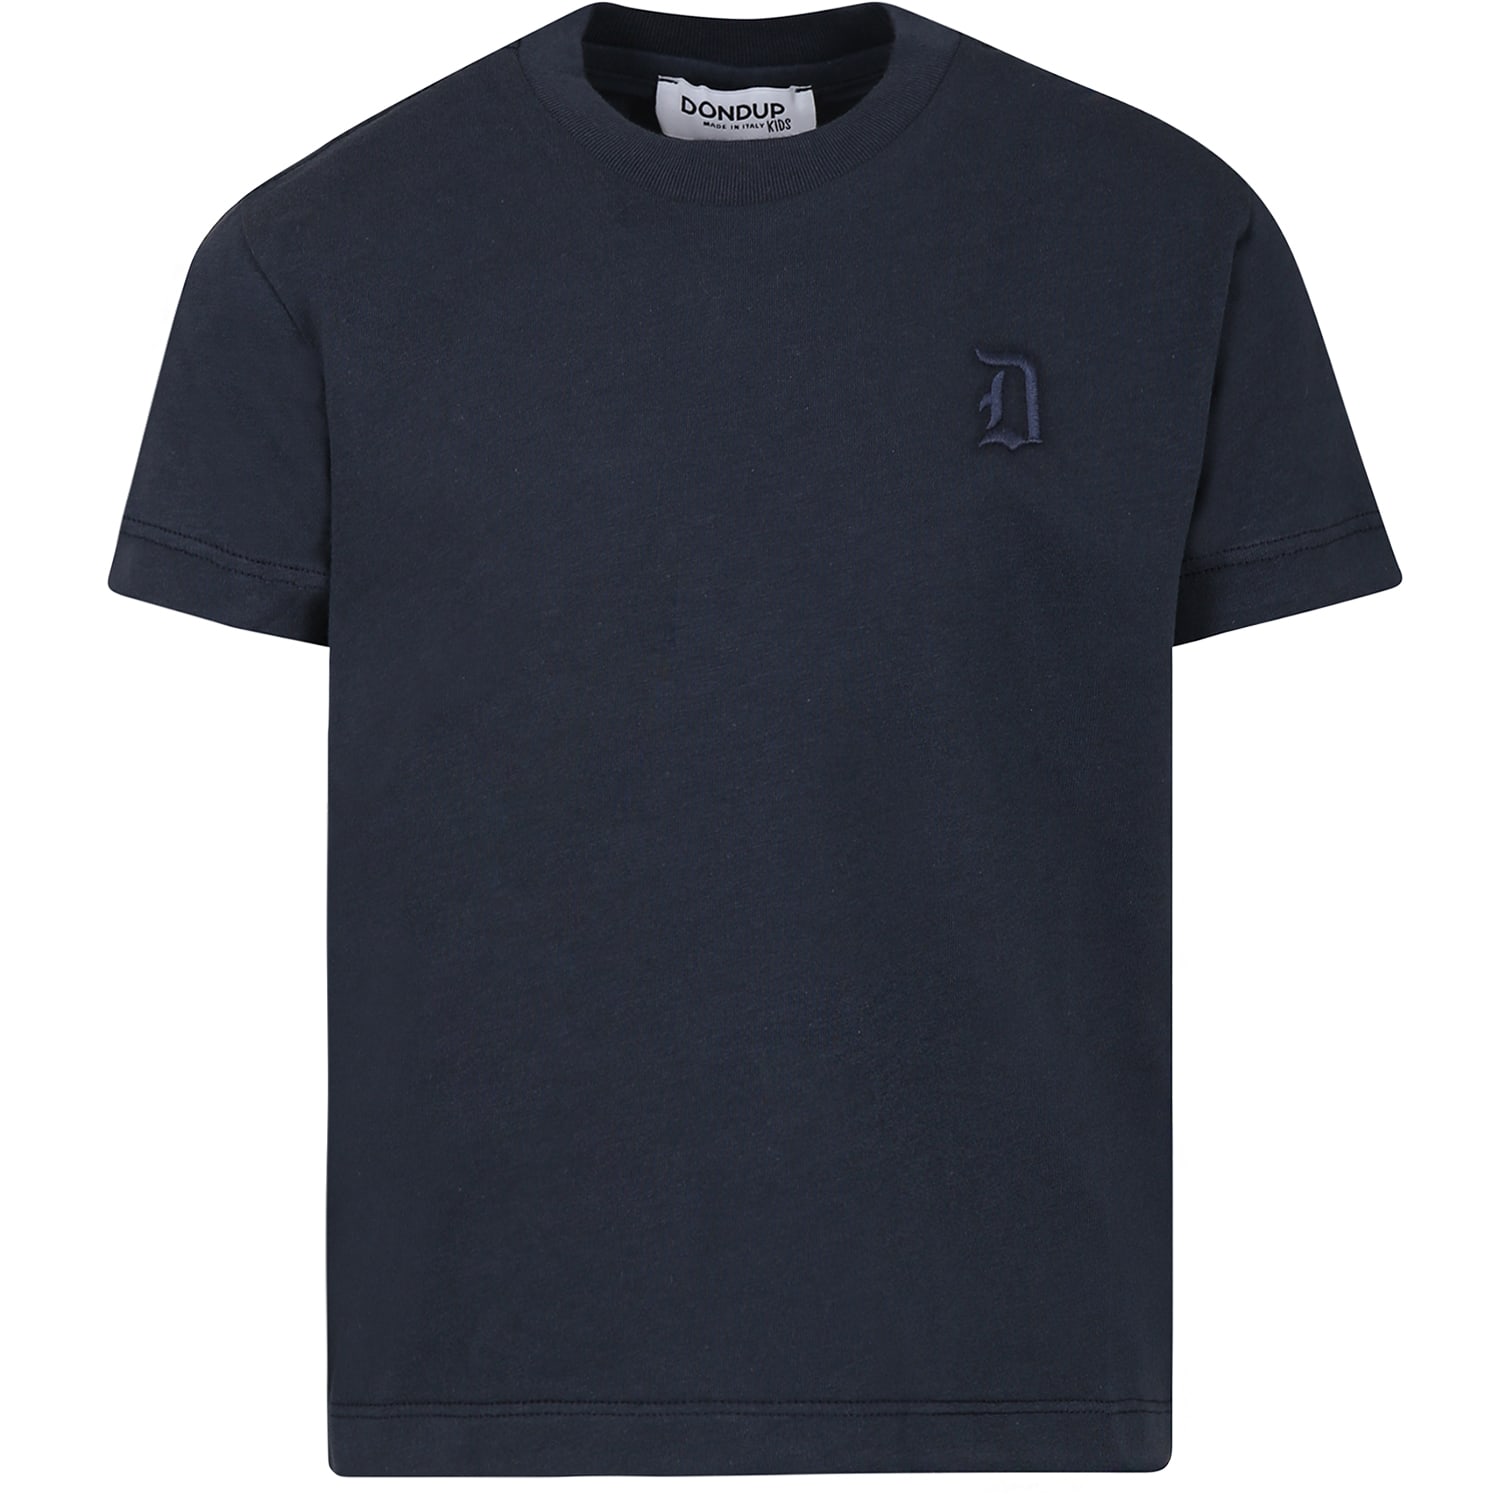 DONDUP BLUE T-SHIRT FOR BOY WITH LOGO